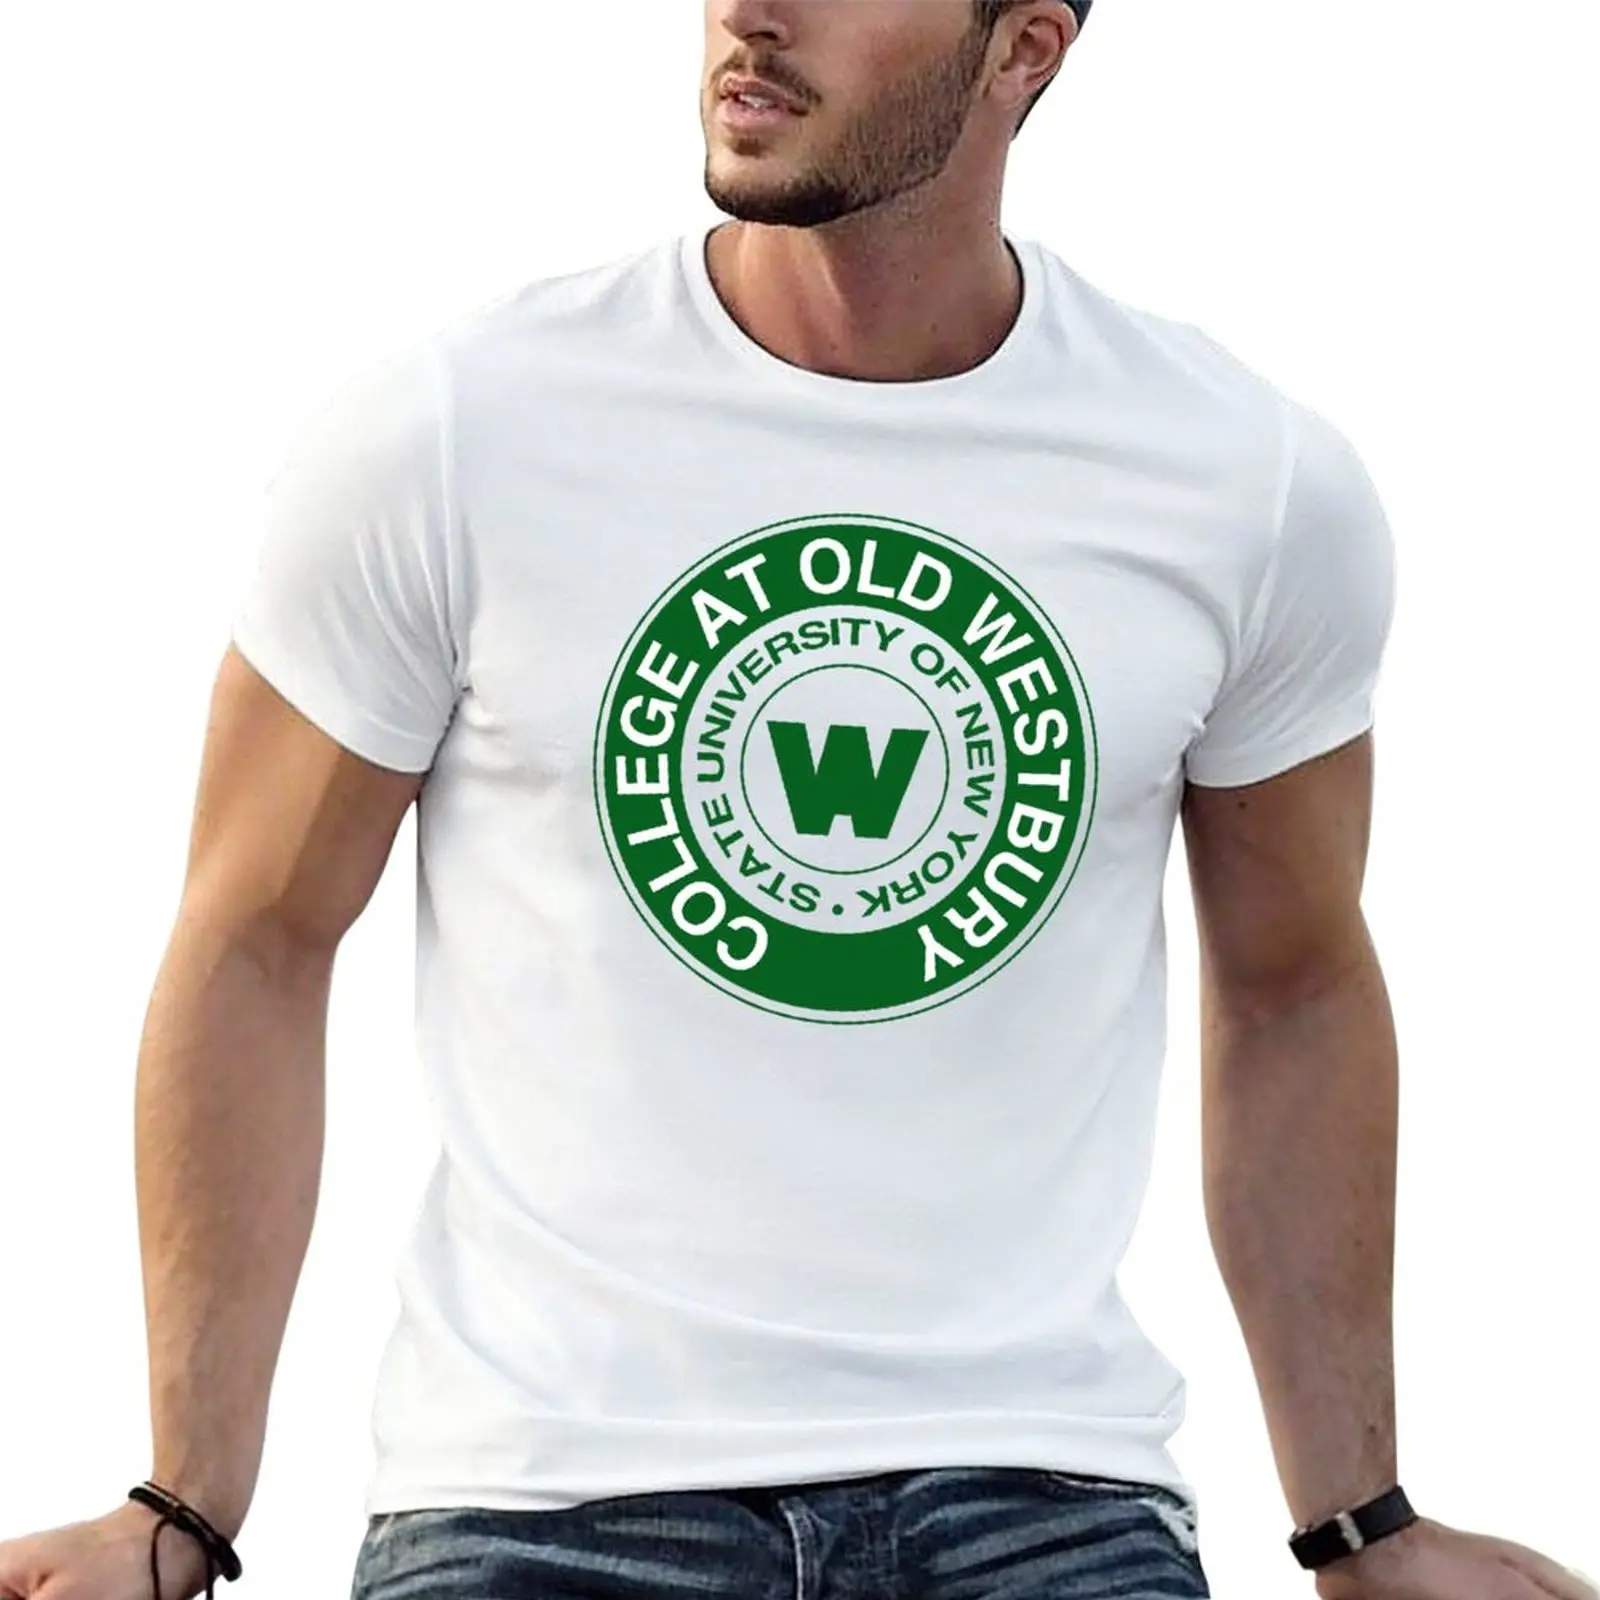 

College-of-SUNY-Old-Westbury T-Shirt blank t shirts Short sleeve graphics t shirt tees heavyweight t shirts for men